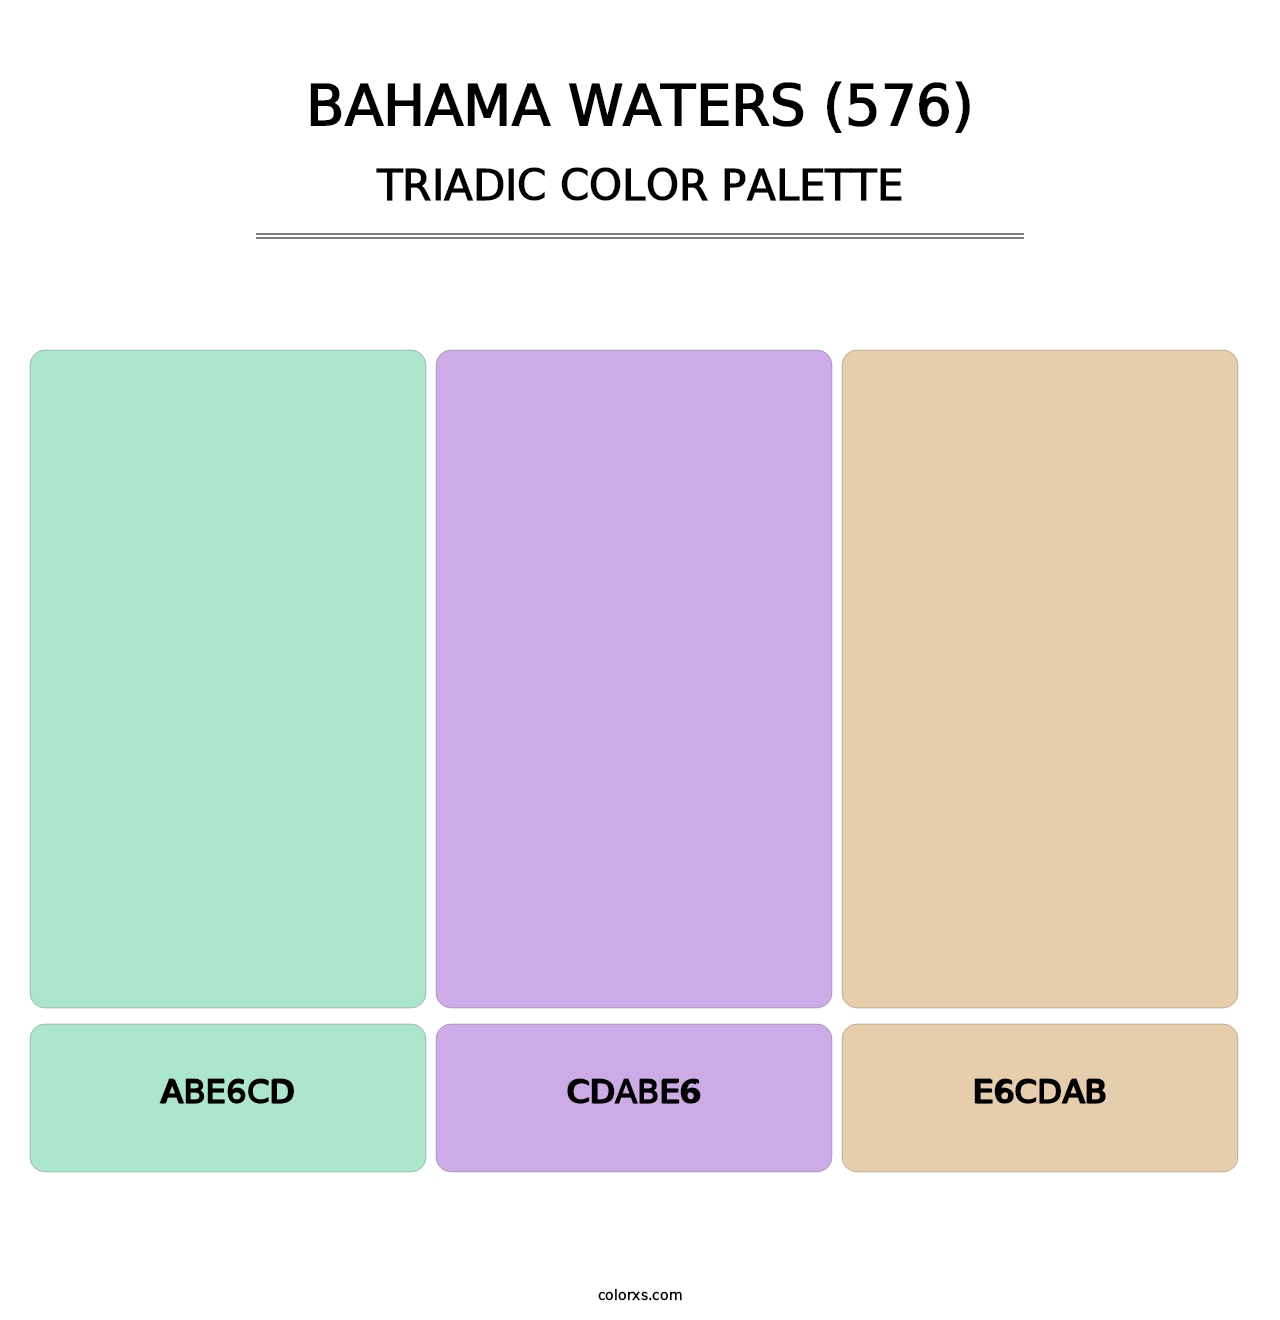 Bahama Waters (576) - Triadic Color Palette